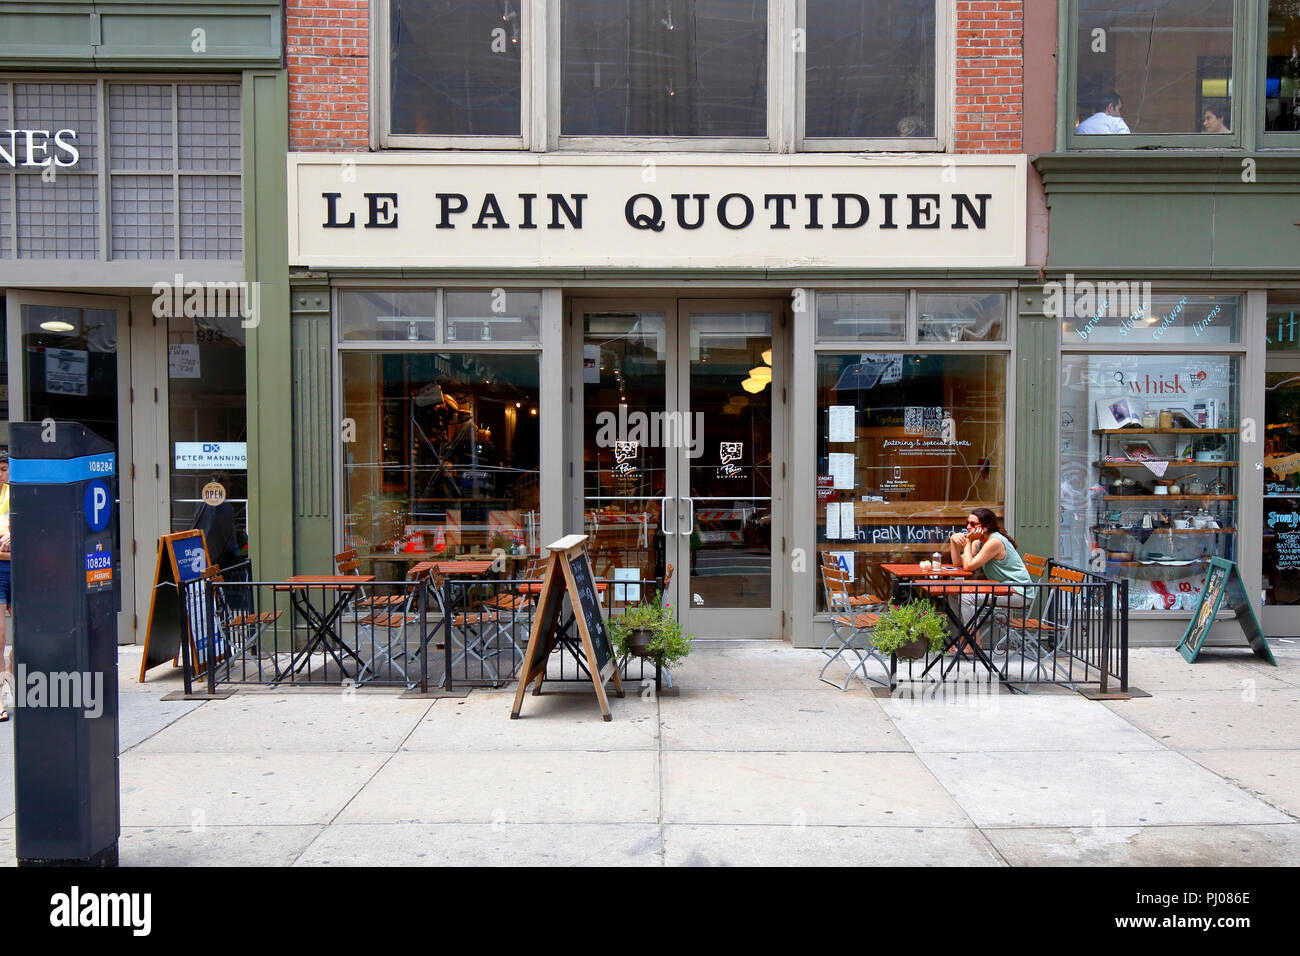 Le Pain Quotidien, 931 Broadway, New York, NY. exterior storefront of a bakery, and sidewalk cafe in the Flatiron district of Manhattan. Stock Photo